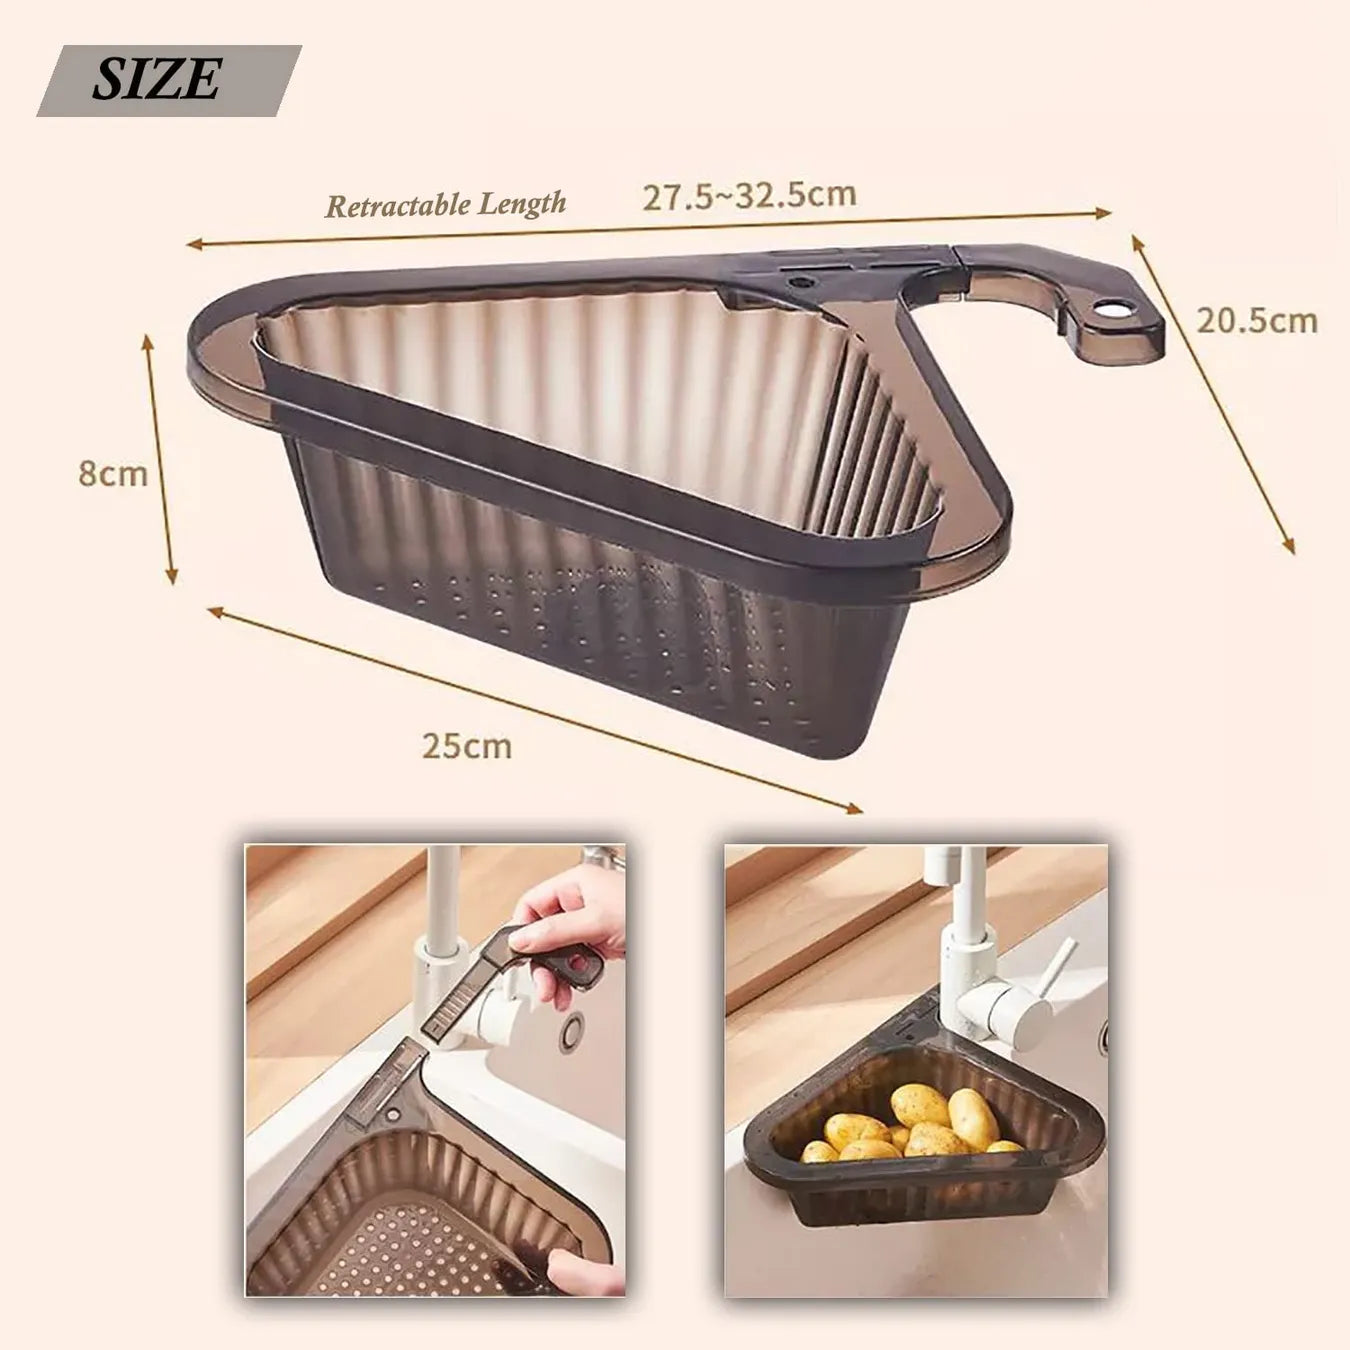 Telescopic Sink Drain Basket with its size